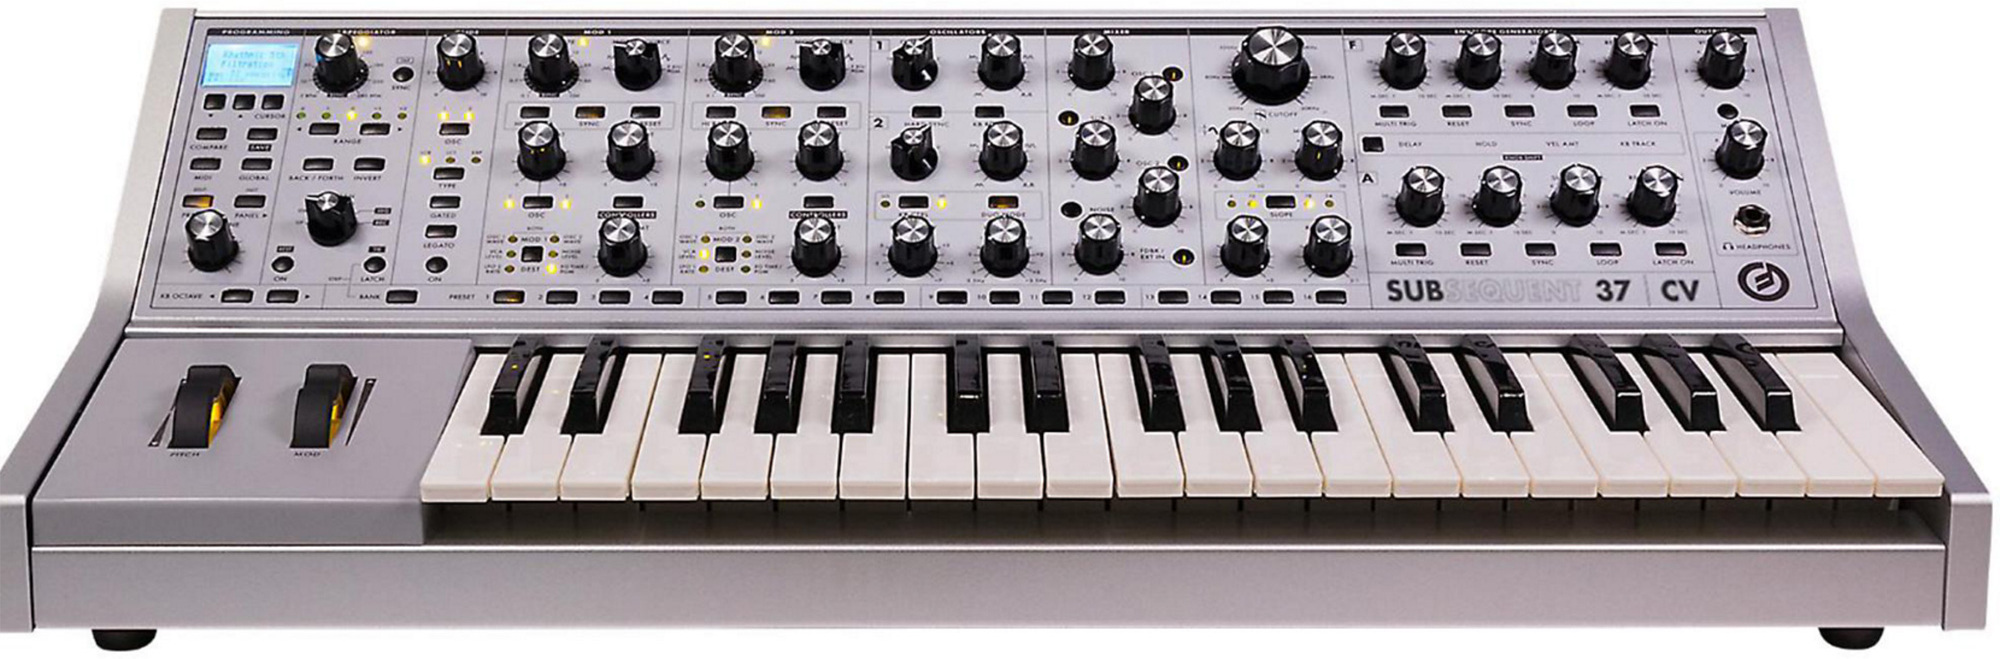 Moog Subsequent 37 Cv - Synthesizer - Main picture